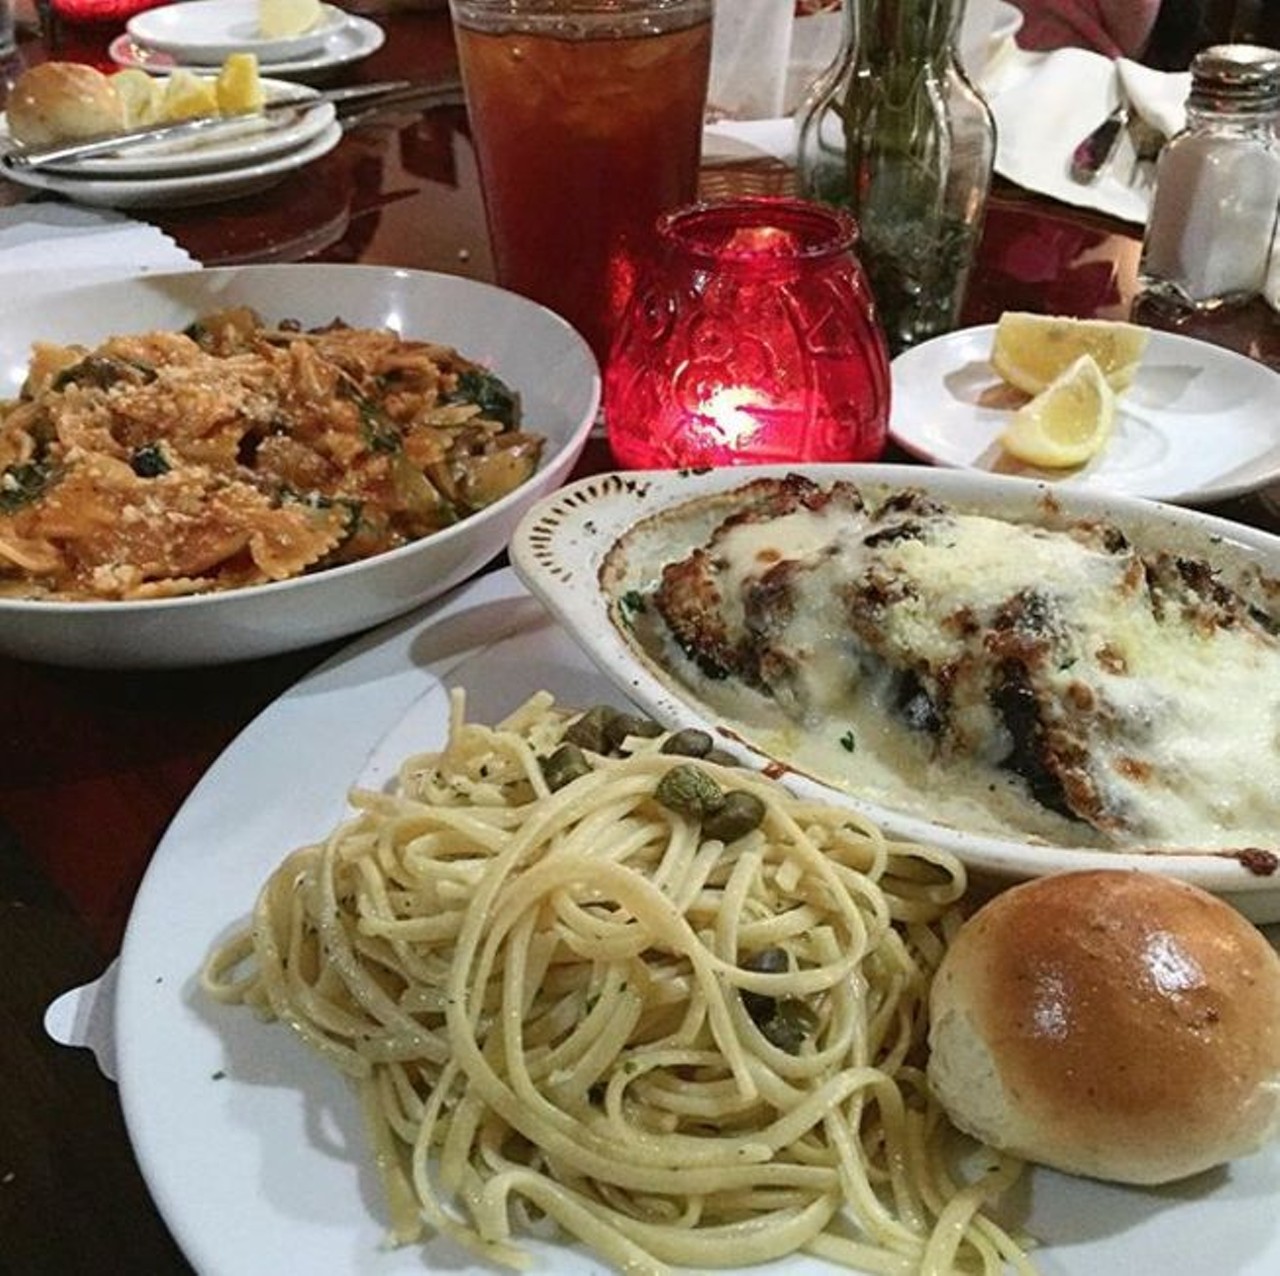 Umberto&#146;s Italian Grill
7616 Culebra Rd.,(210) 684-4747, umbertositaliangrill.net
While visiting Umberto&#146;s Italian Grill be sure to check out the chicken gorgonzola entree, though you&#146;ll be satisfied with any of their chicken, pasta or seafood dishes.
Photo via Instagram, pincherichemijo